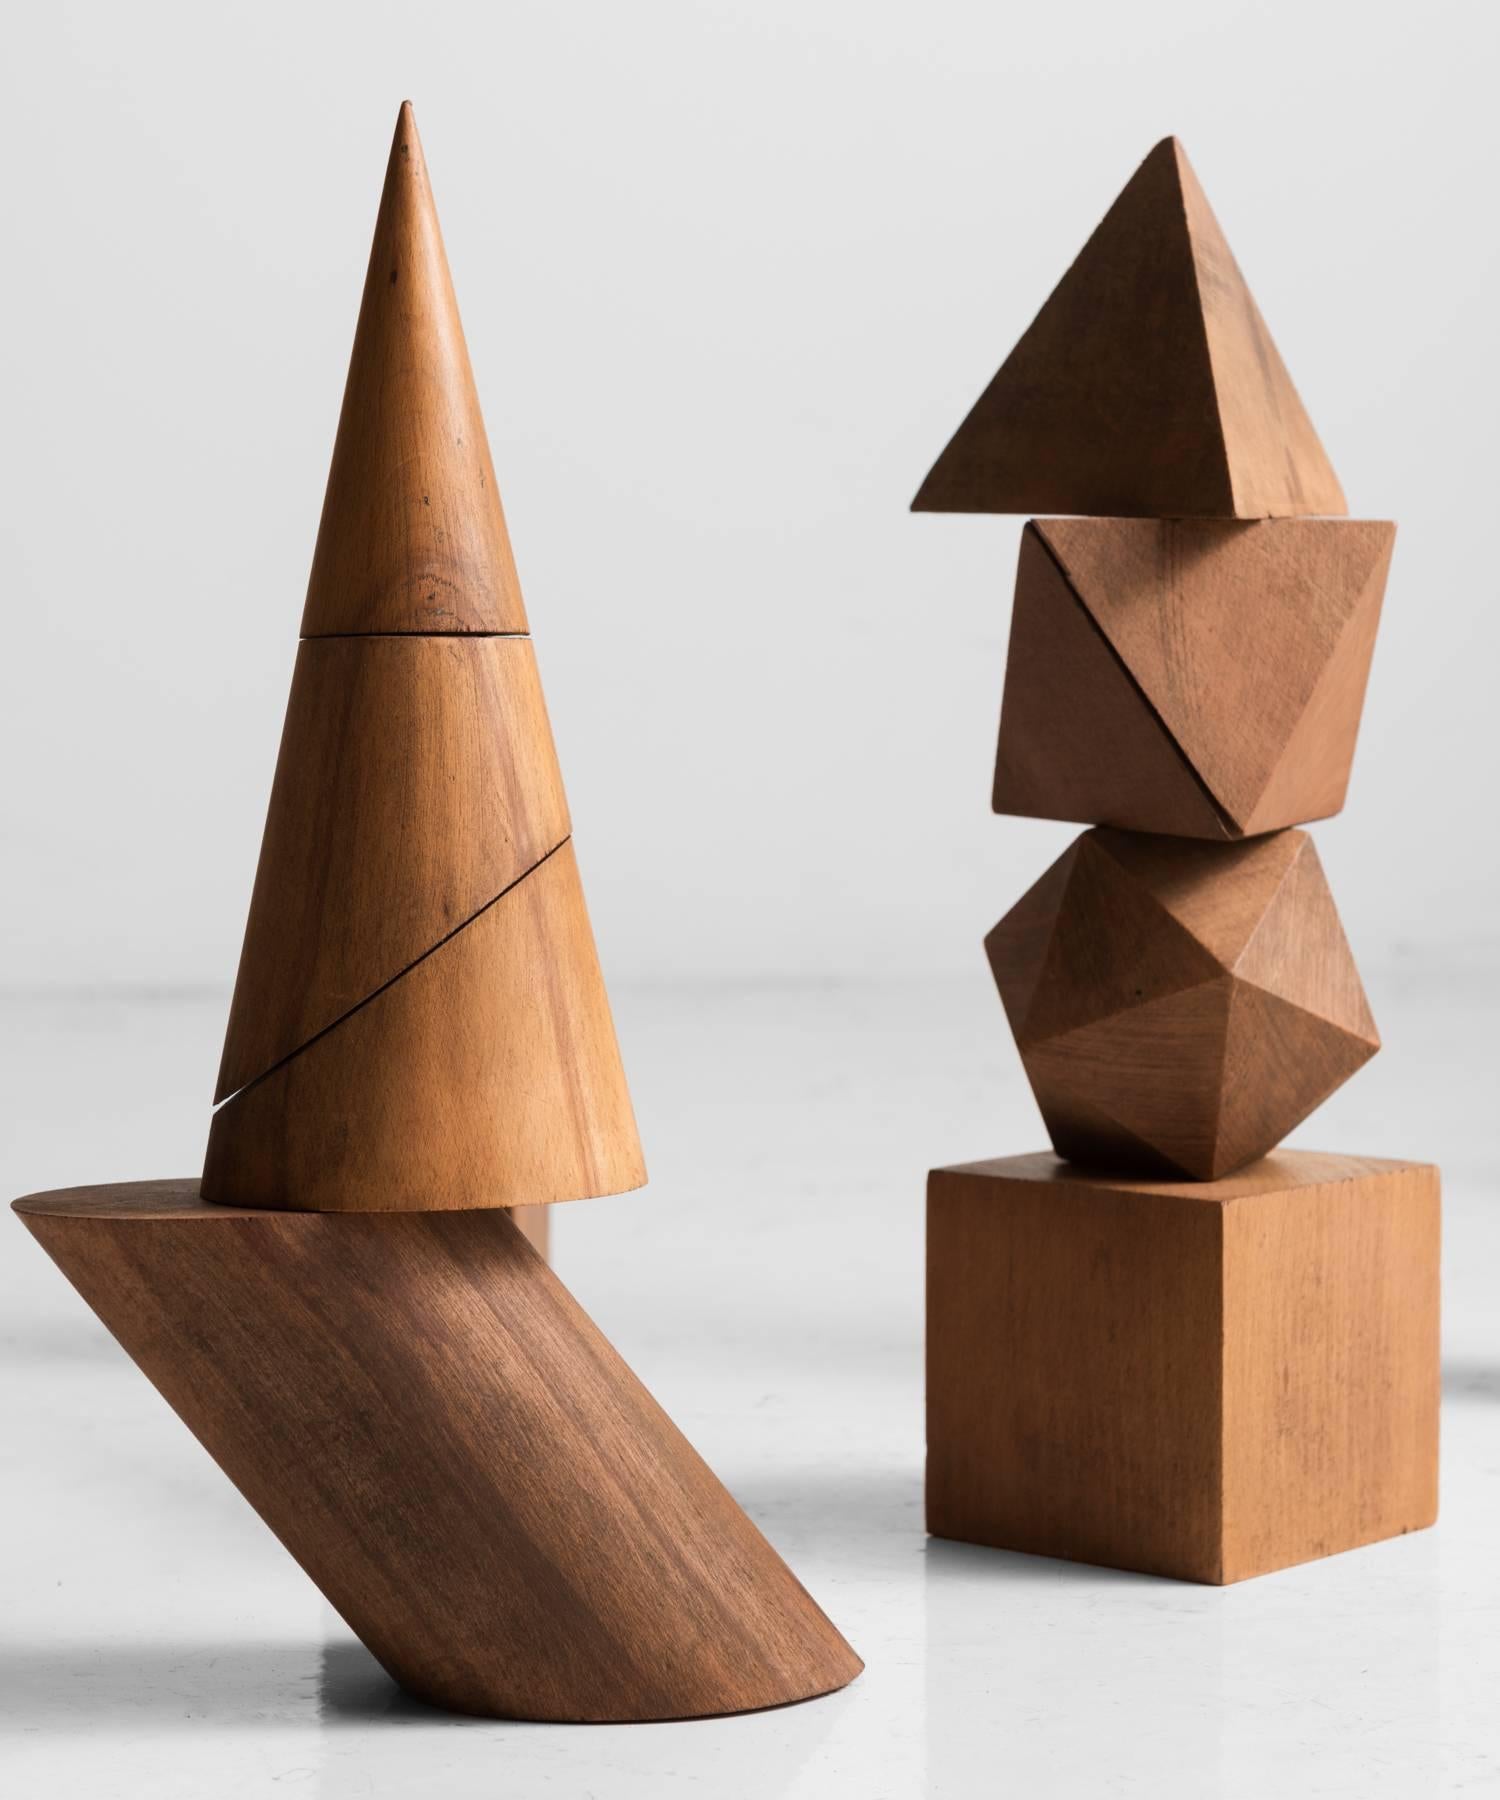 Italian Complete Set of Wooden Geometric Forms, circa 1957